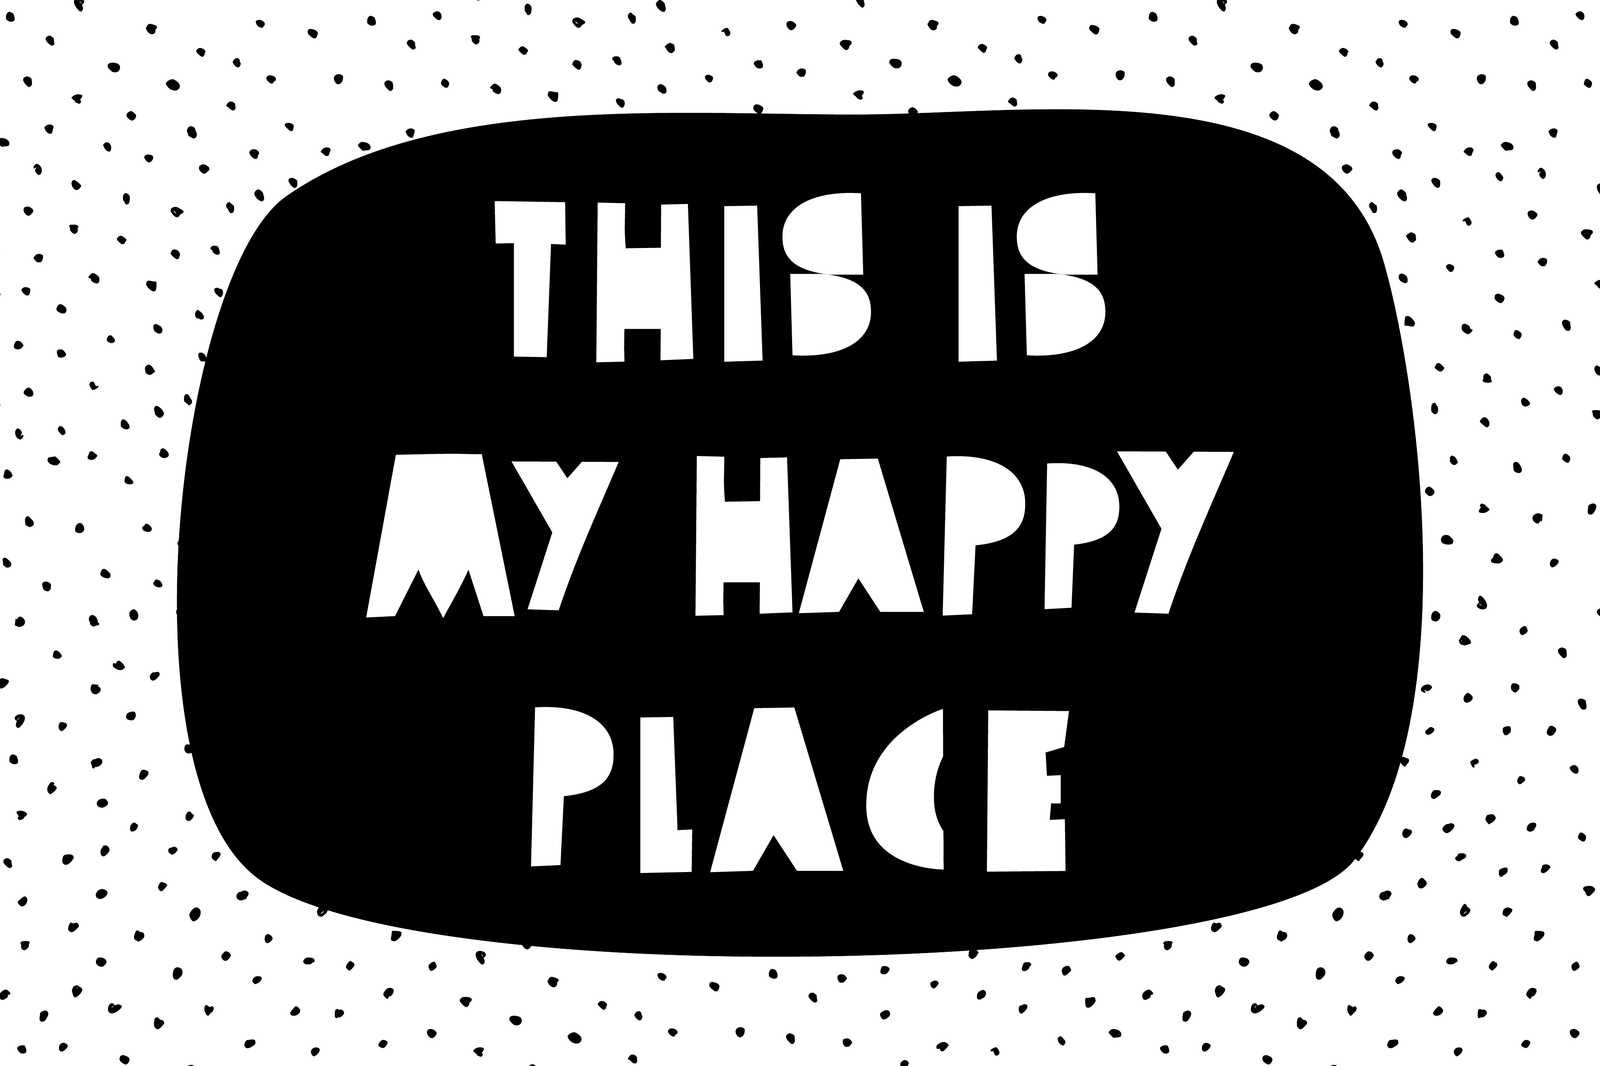             Canvas for children's room with lettering "This is my happy place" - 90 cm x 60 cm
        